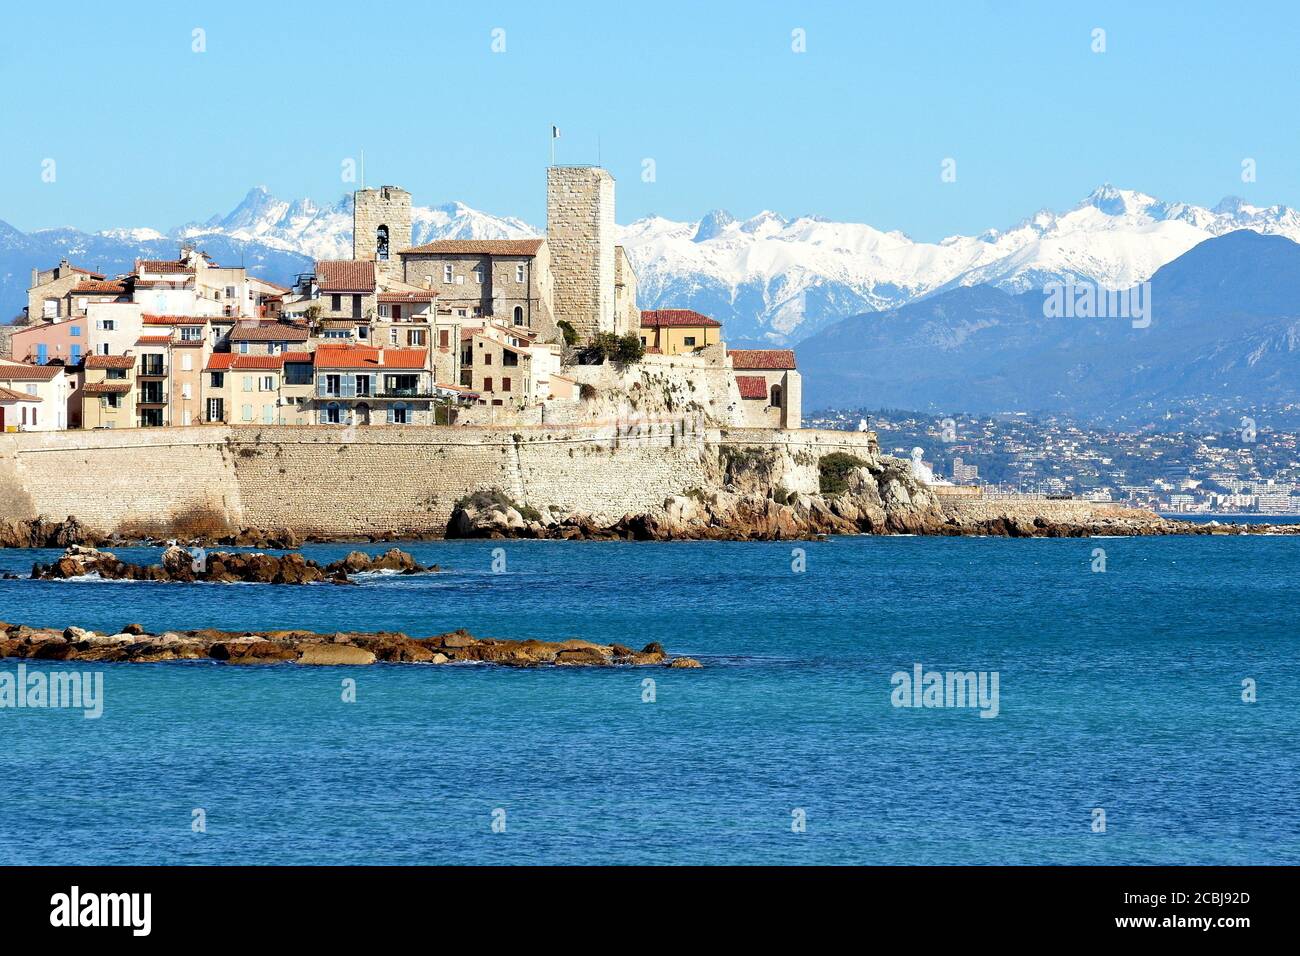 France, french riviera, The old town of Antibes with its ramparts and the snowy Mercantour massive. Stock Photo